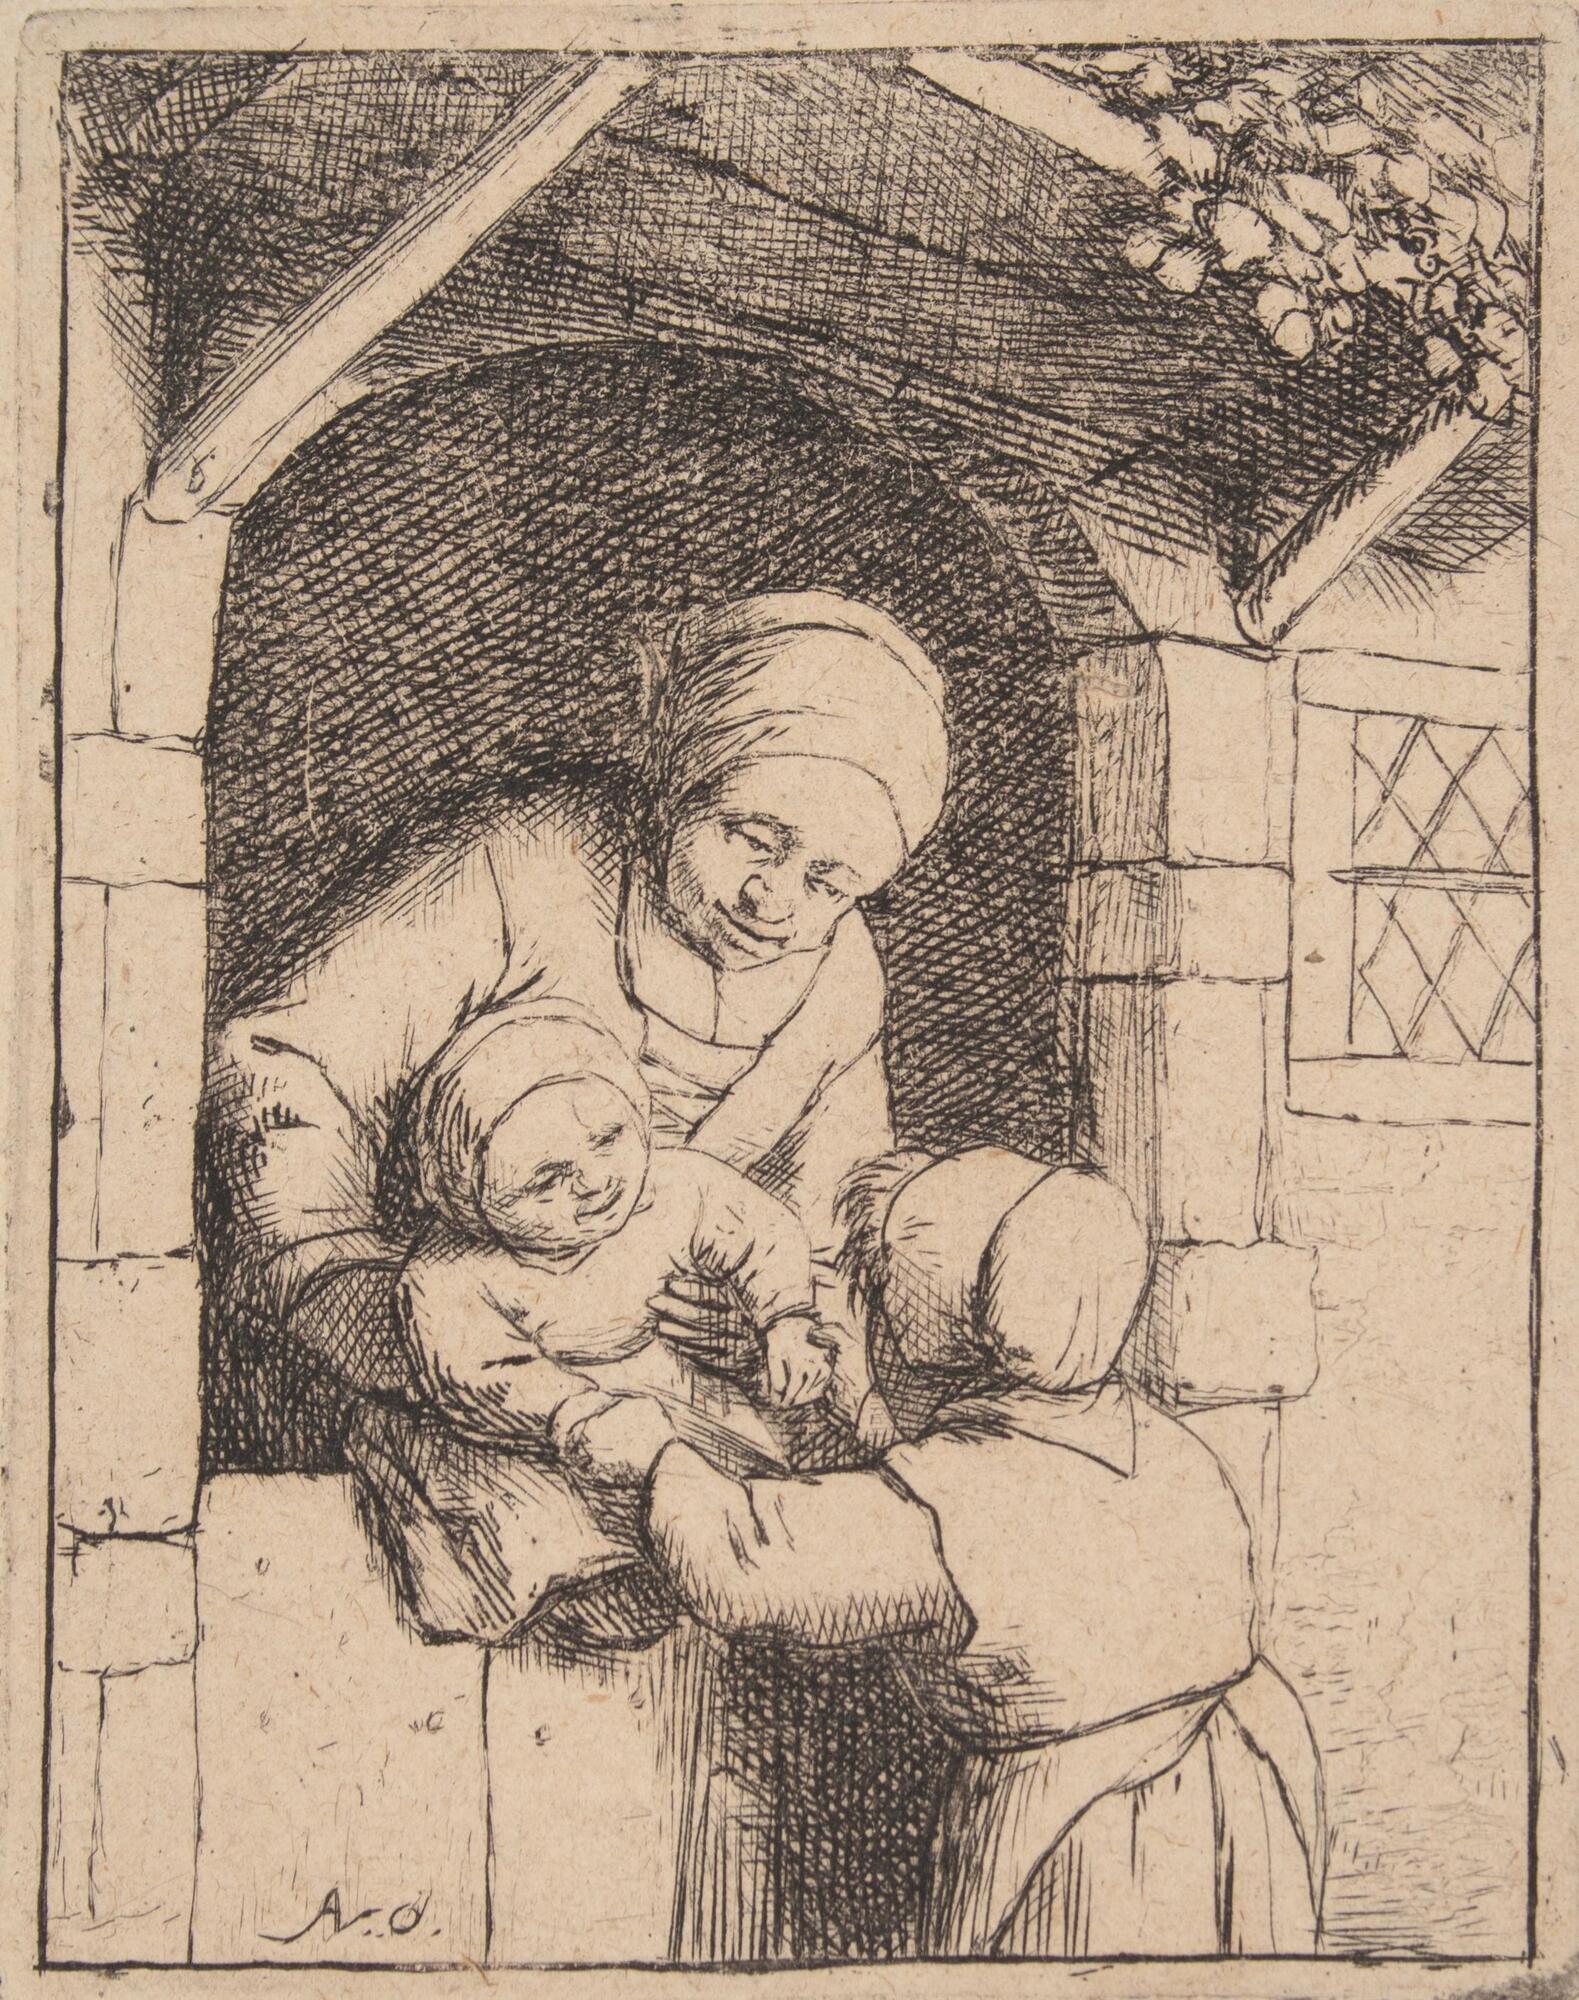 A woman in an arched doorway handing a baby to another woman on the other side. They both have head coverings on, the windows of the building are cross-hatched.